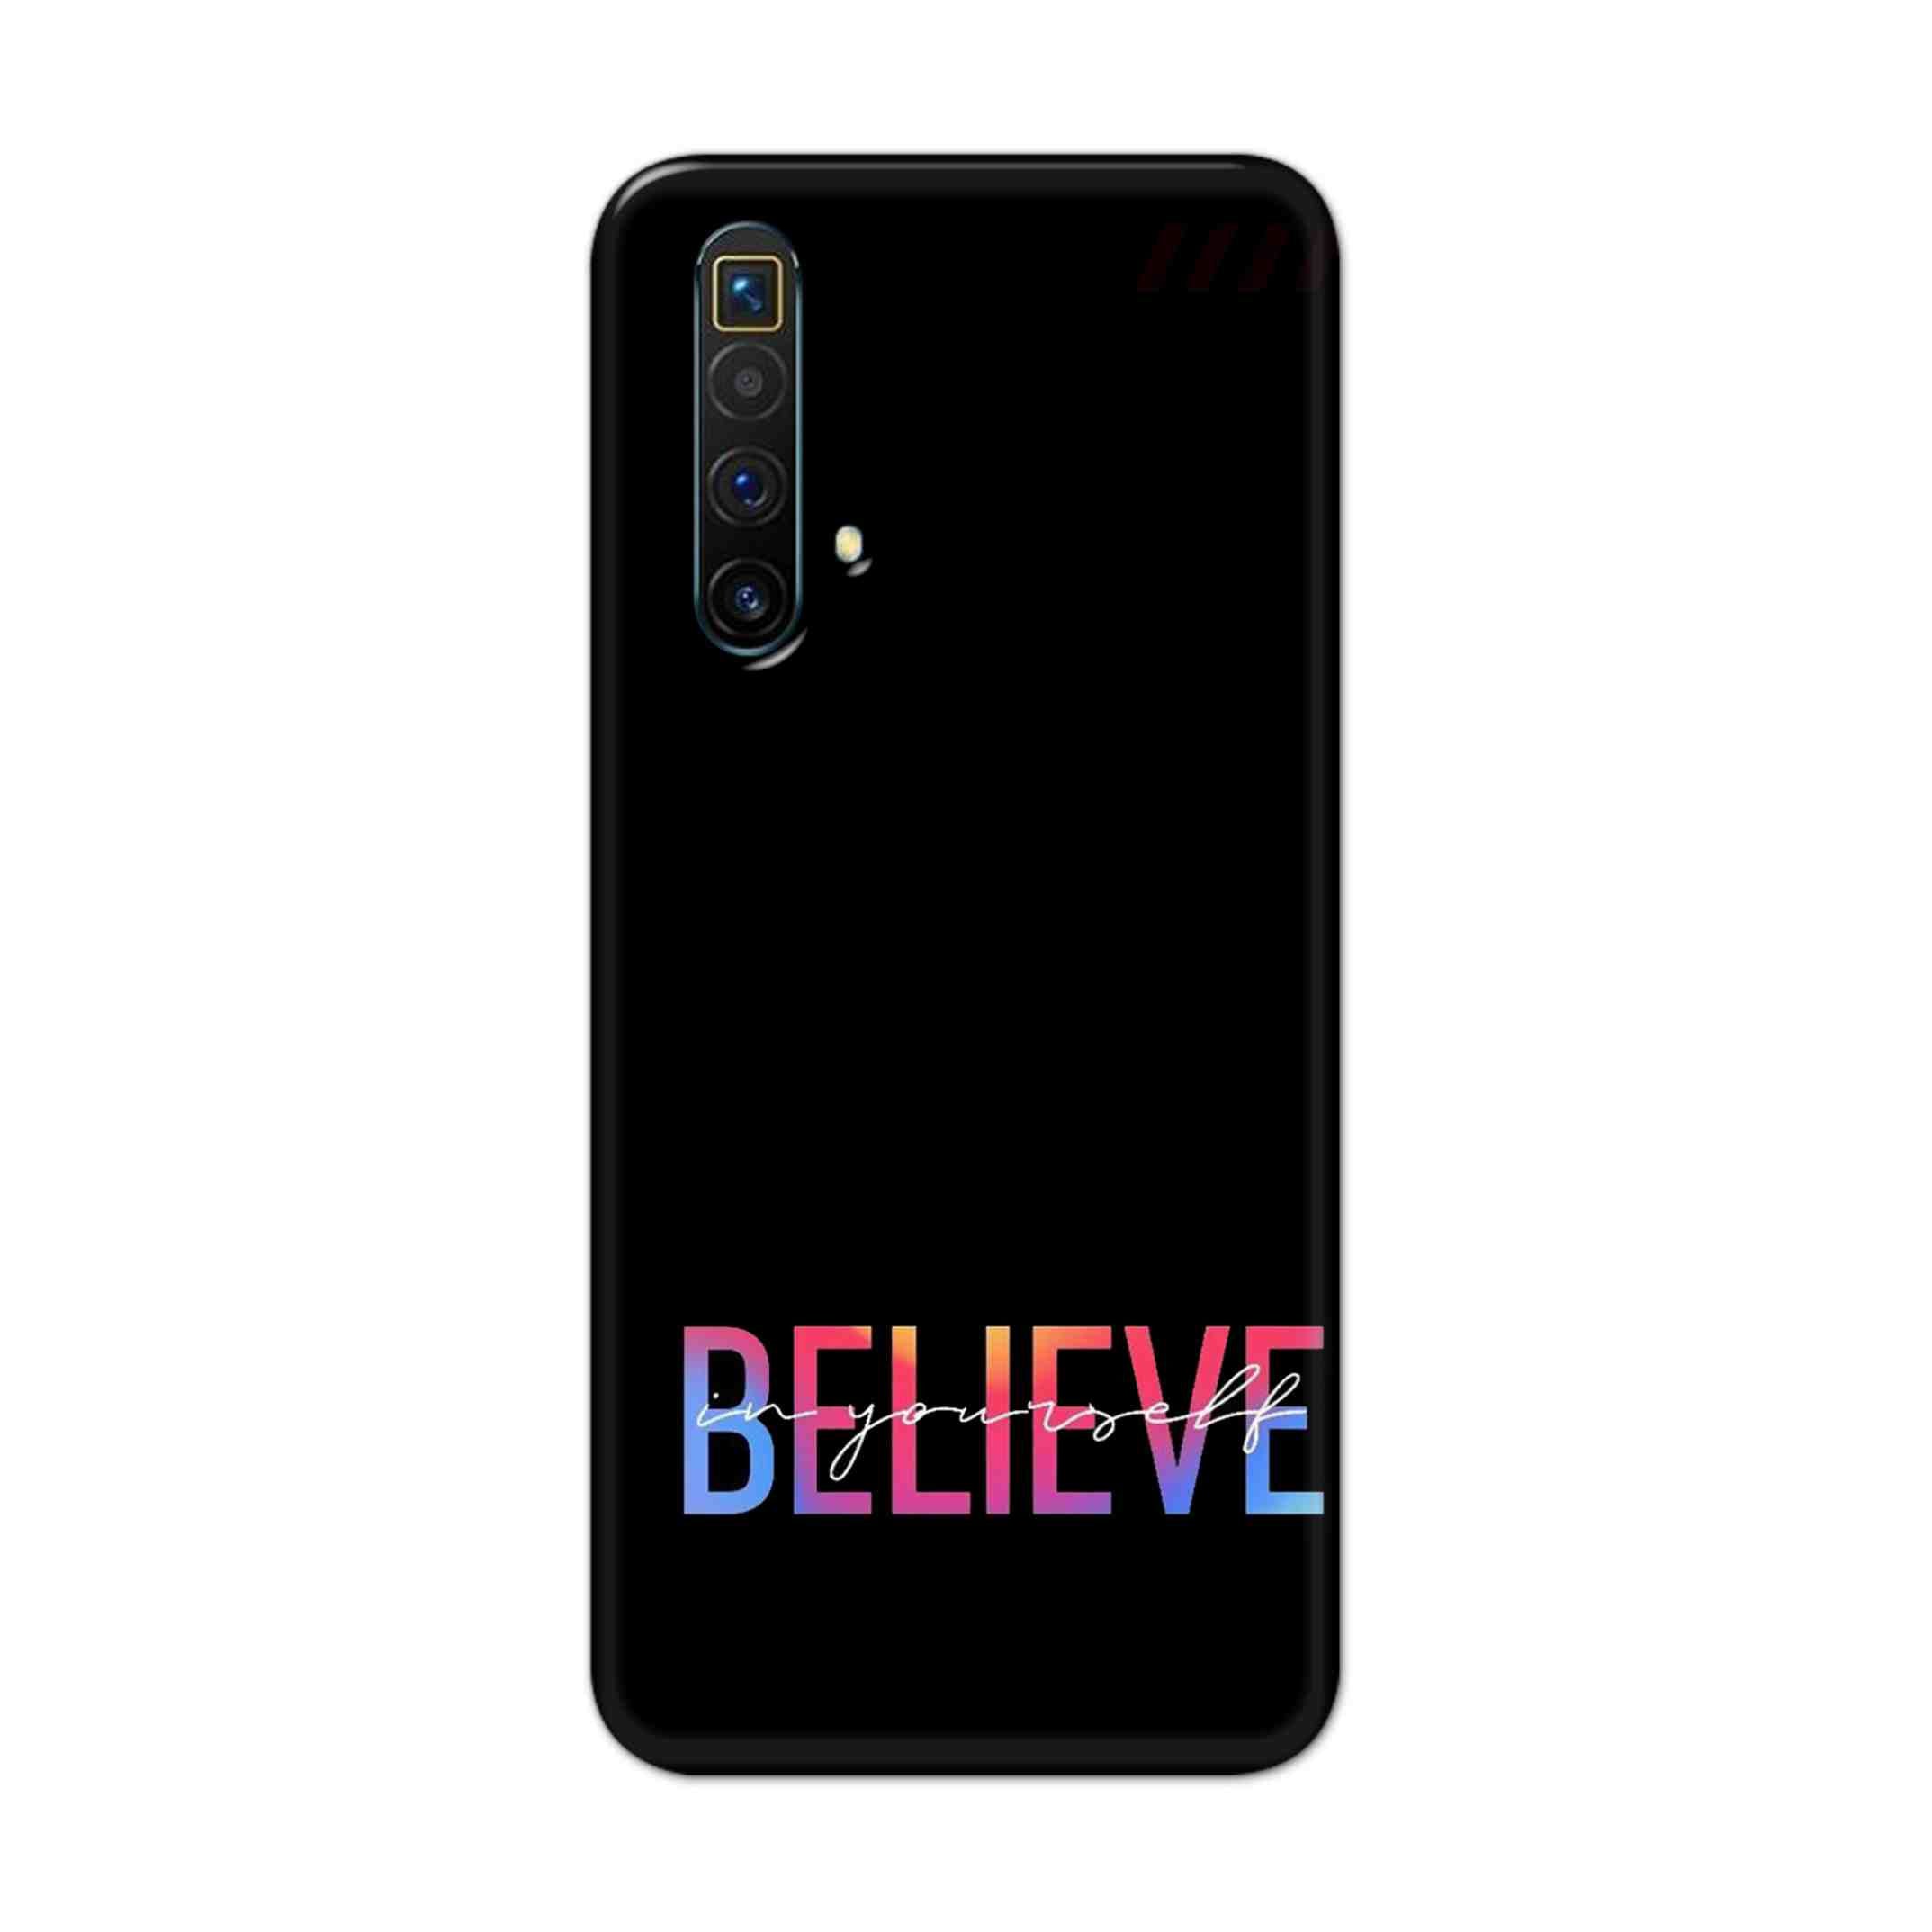 Buy Believe Hard Back Mobile Phone Case Cover For Oppo Realme X3 Online